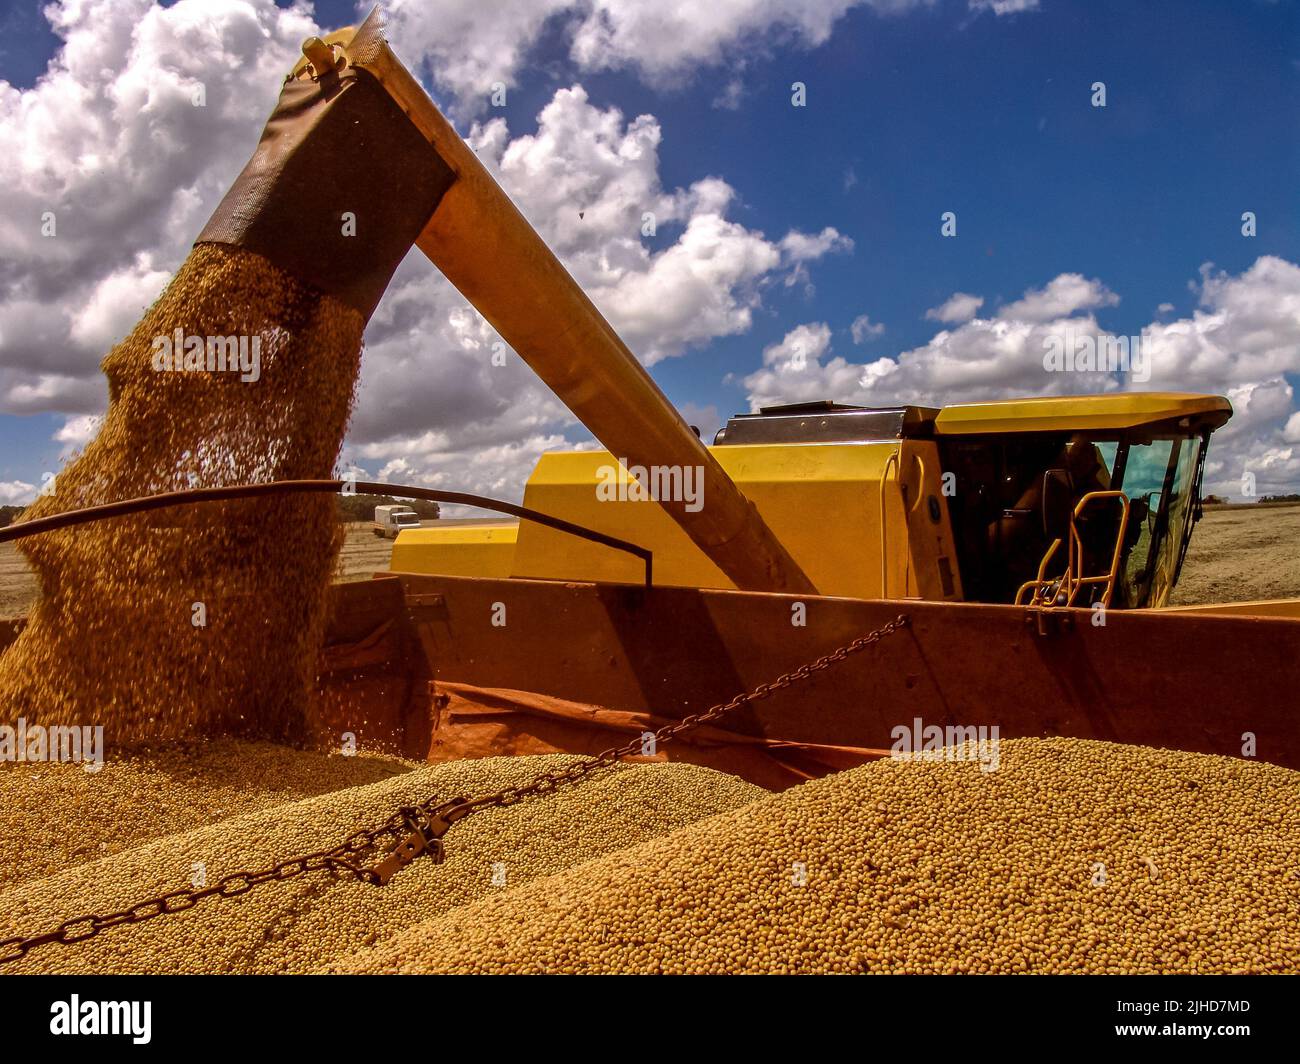 combine harvester loading soybeans in to the truck in Brazil Stock Photo